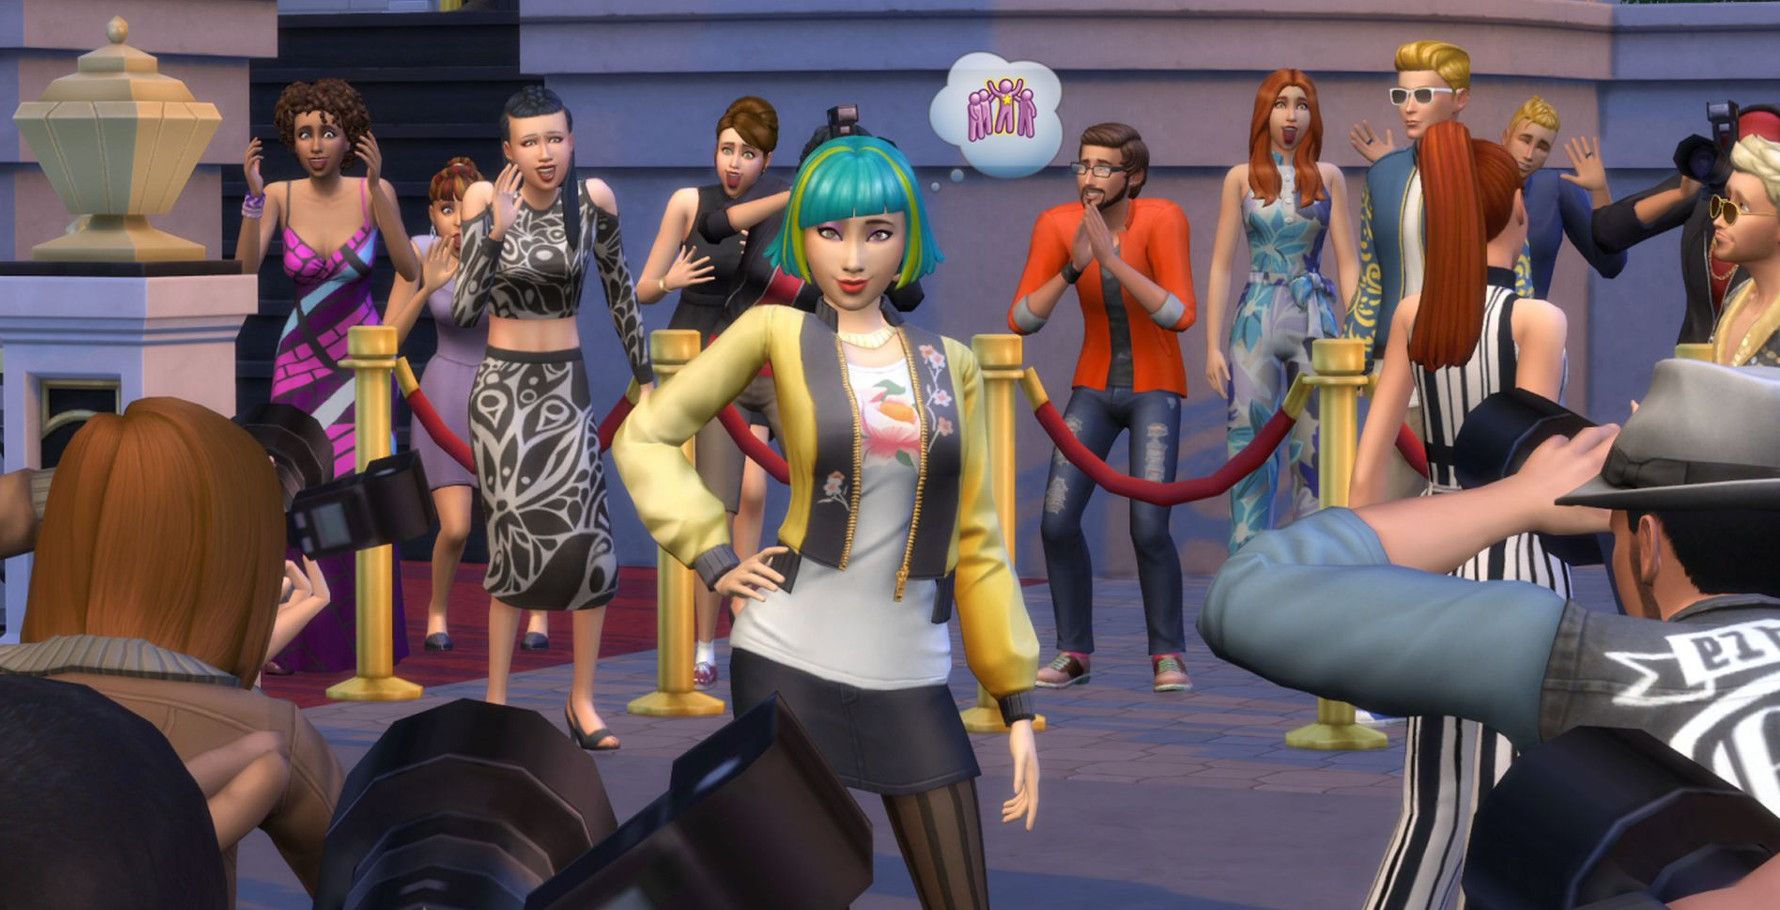 How To Make It As An Actor In The Sims 4: Get Famous - Shofy